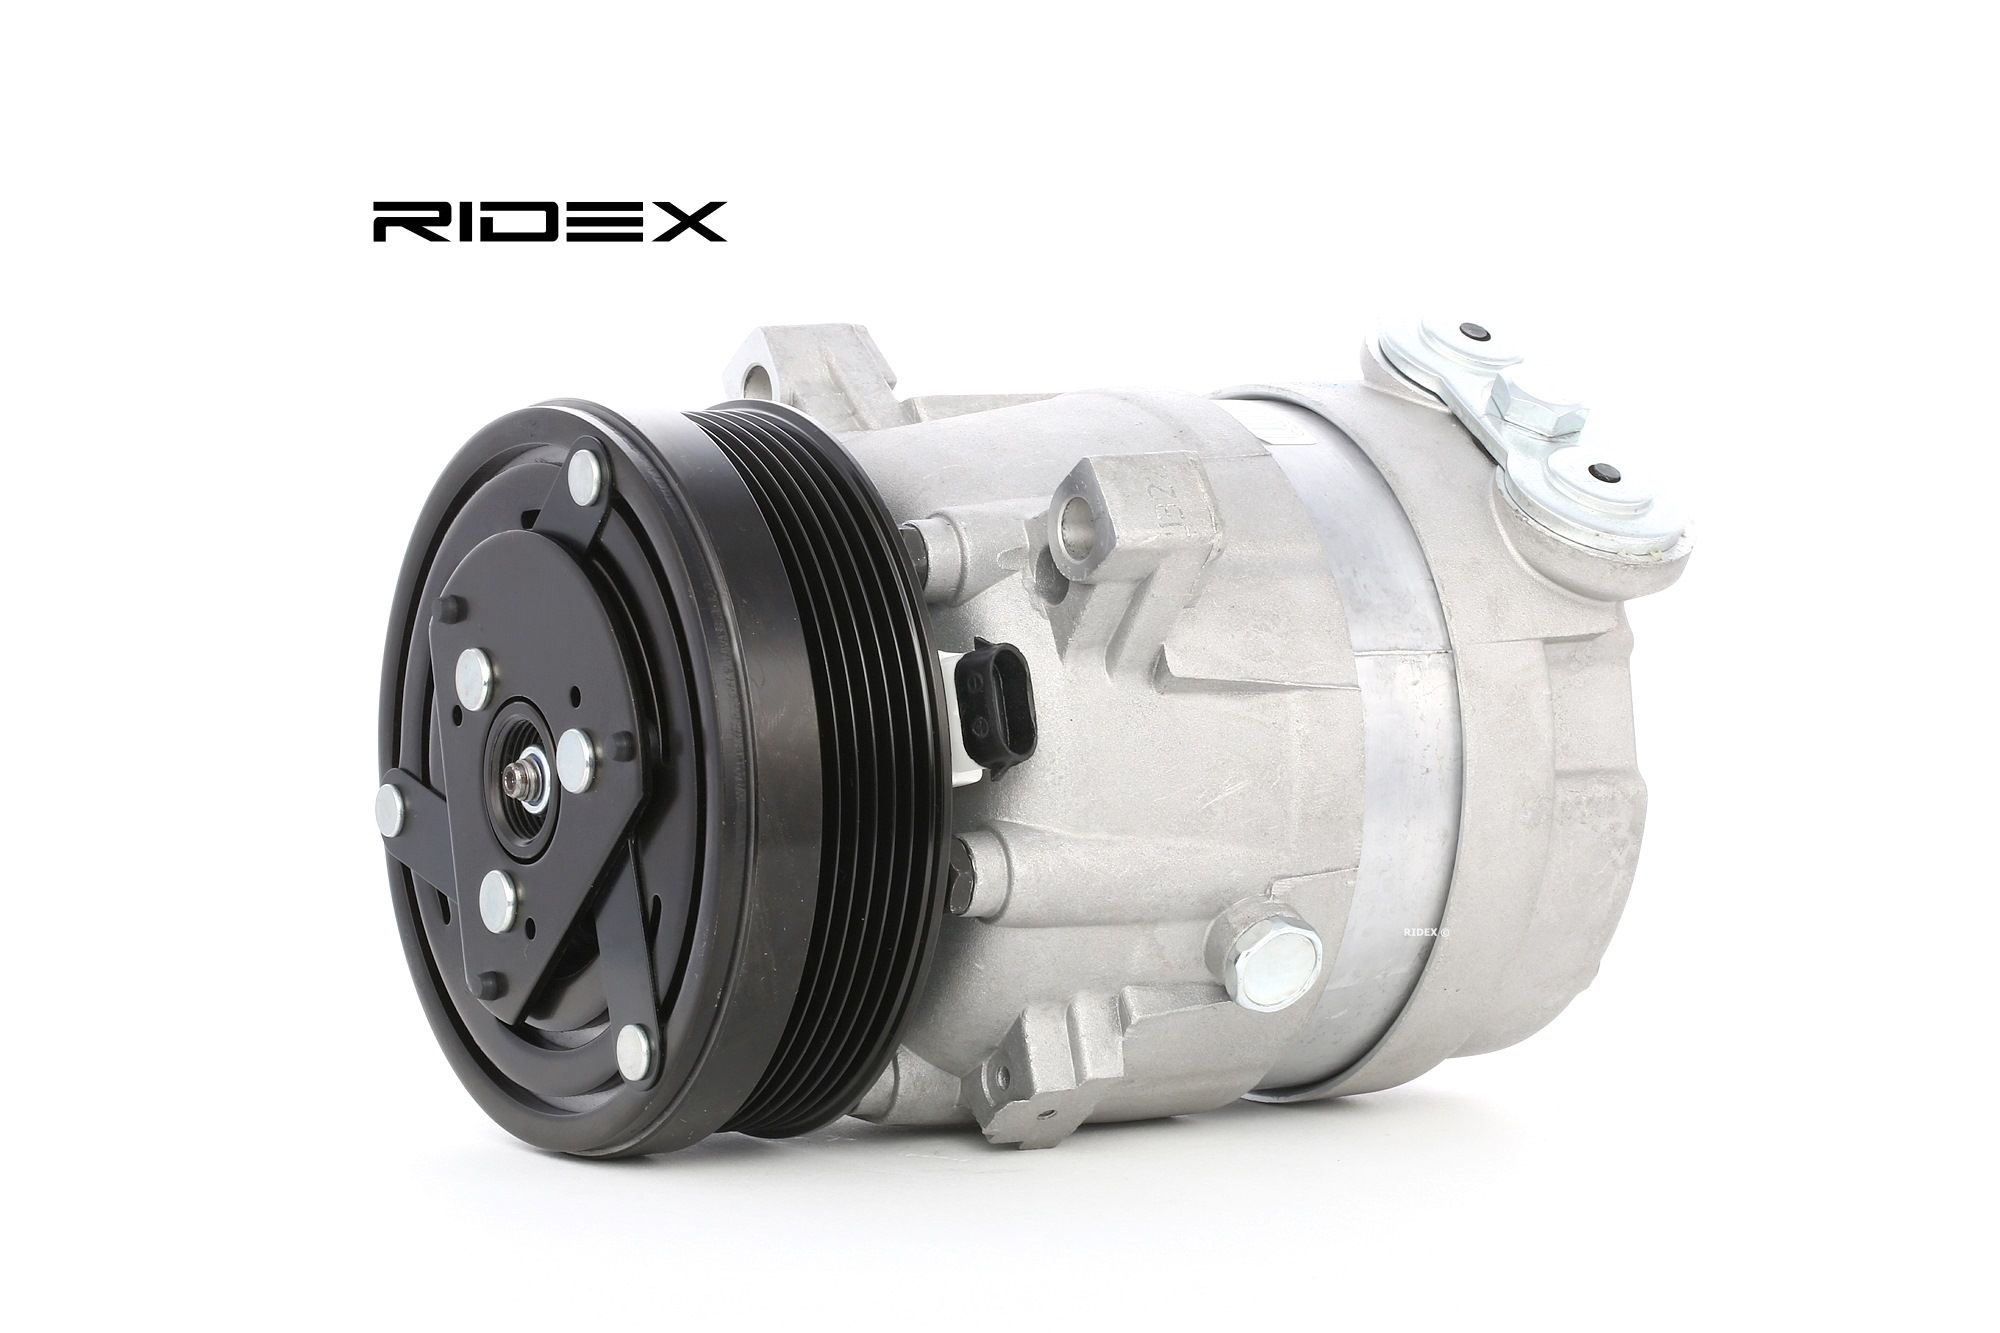 RIDEX 447K0123 Air conditioning compressor V5, PAG 100, R 134a, with PAG compressor oil